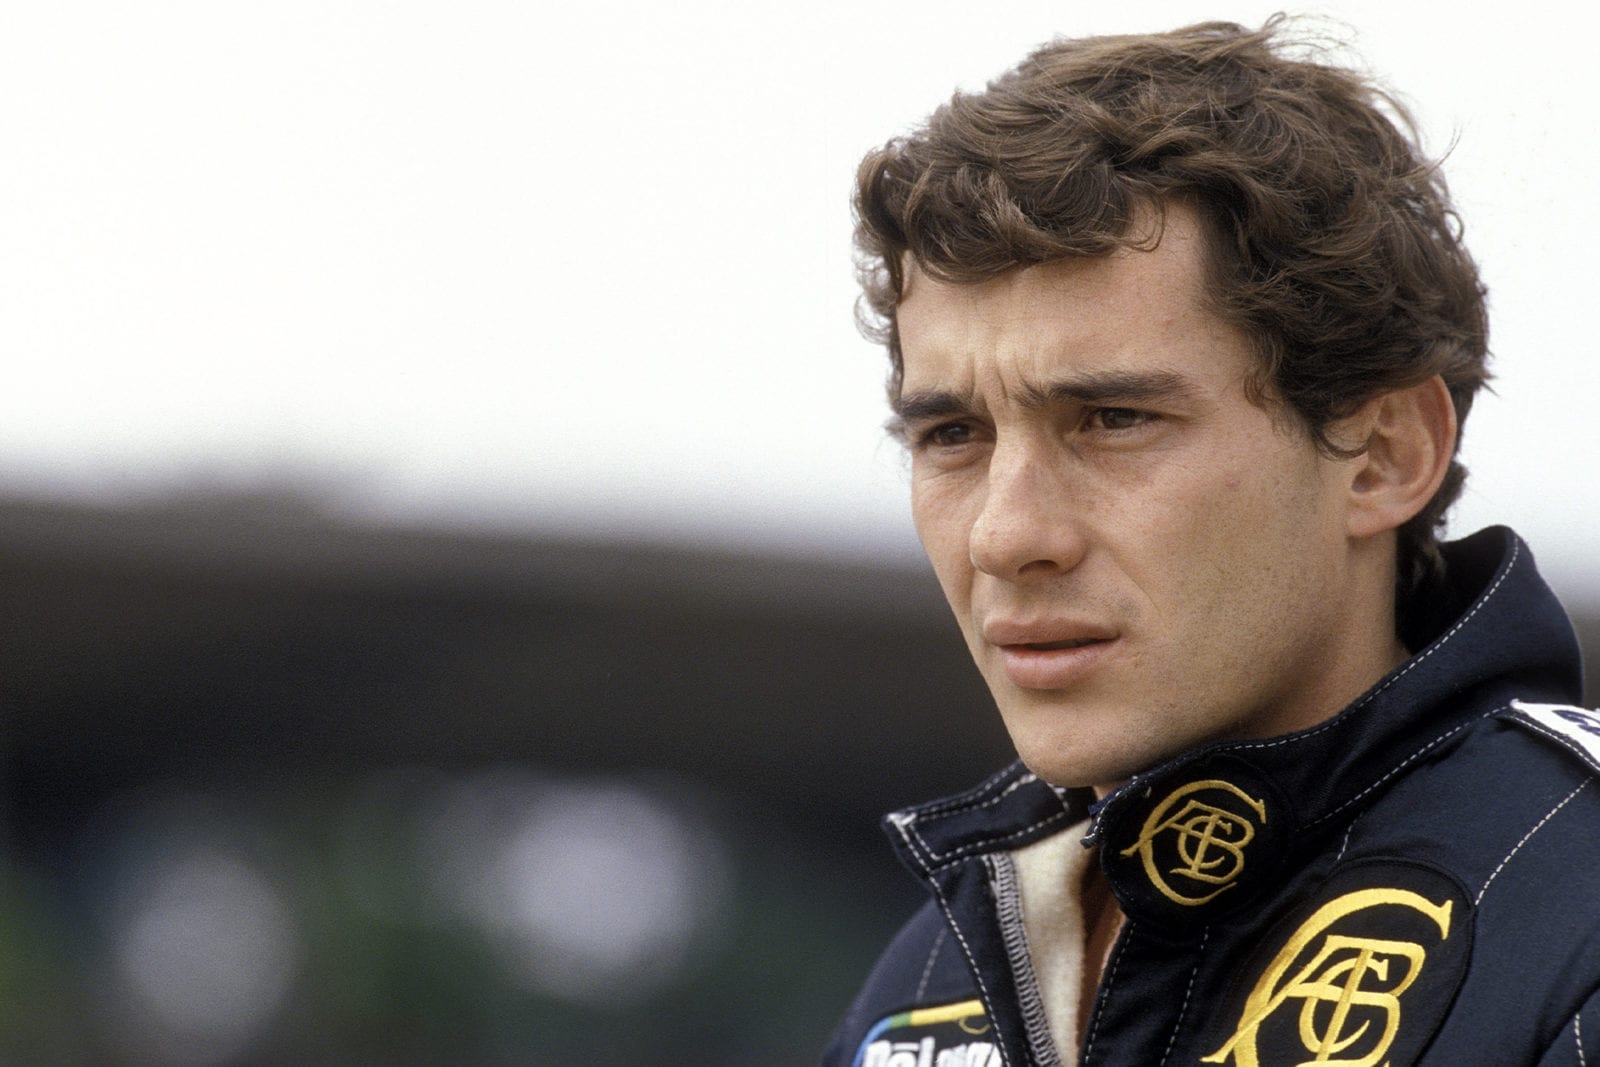 Ayrton Senna tried his hand at rallying for a weekend